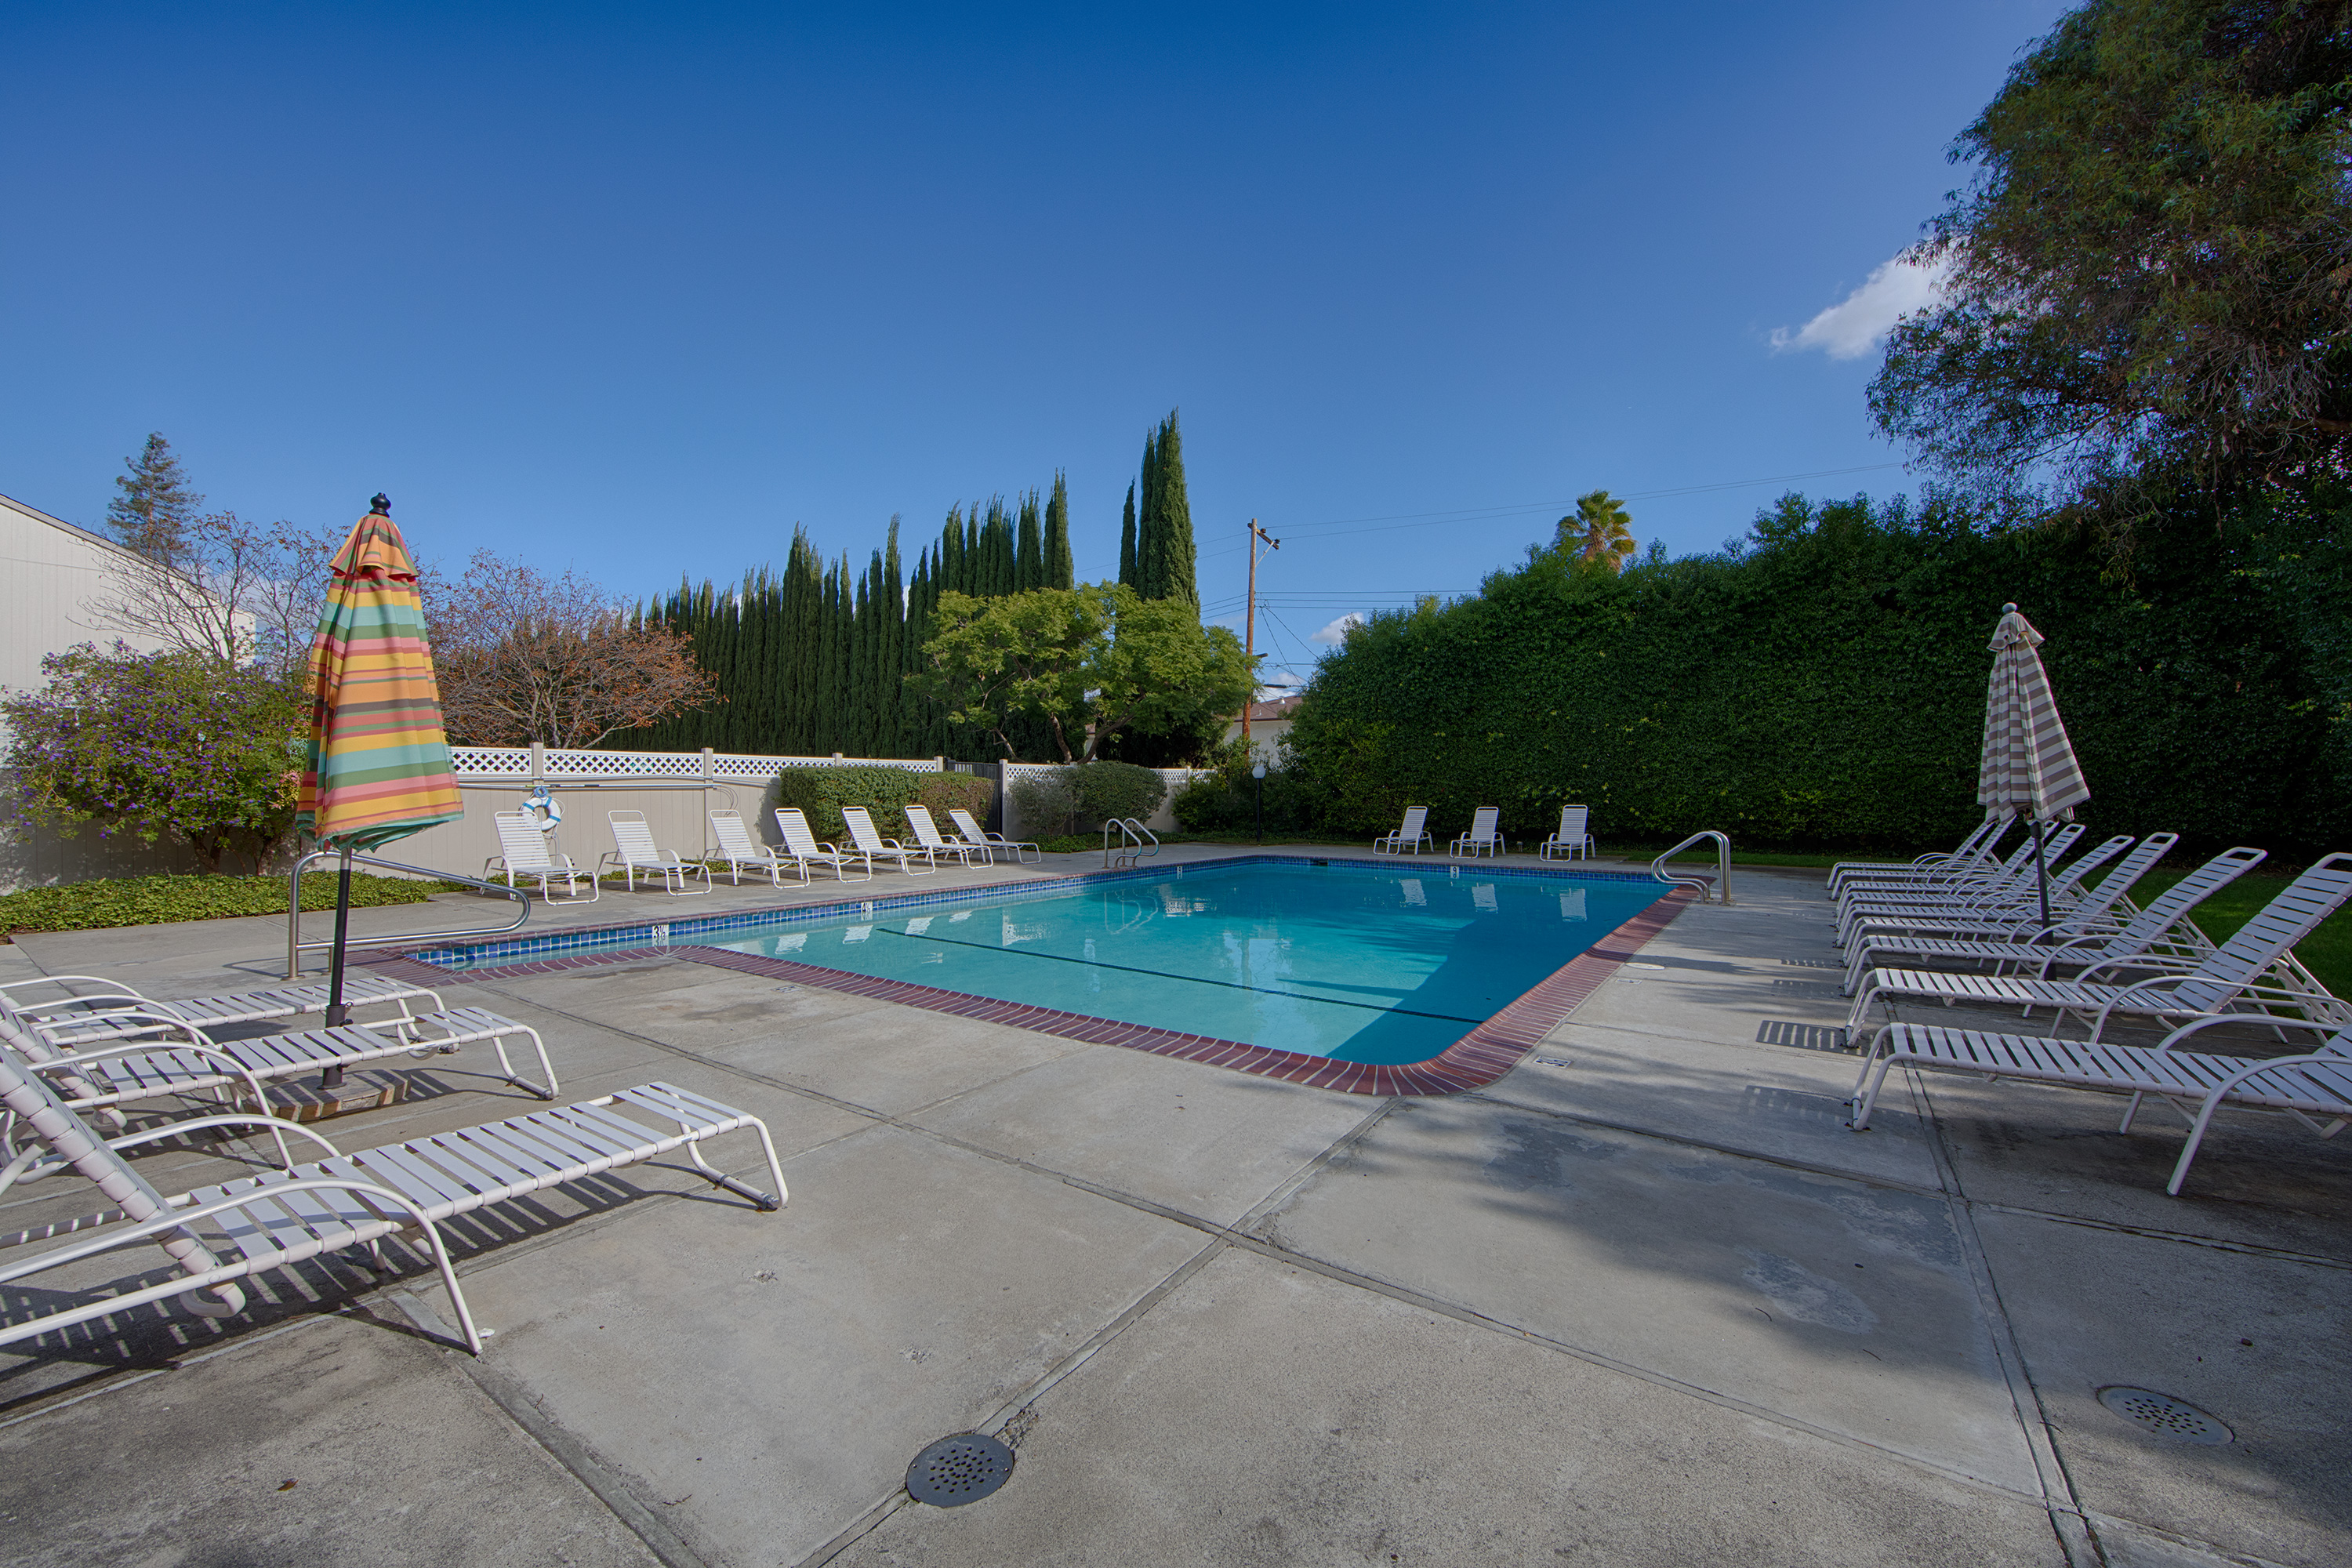 641 W Garland Ter, Sunnyvale 94086 - Complex Pool (A)